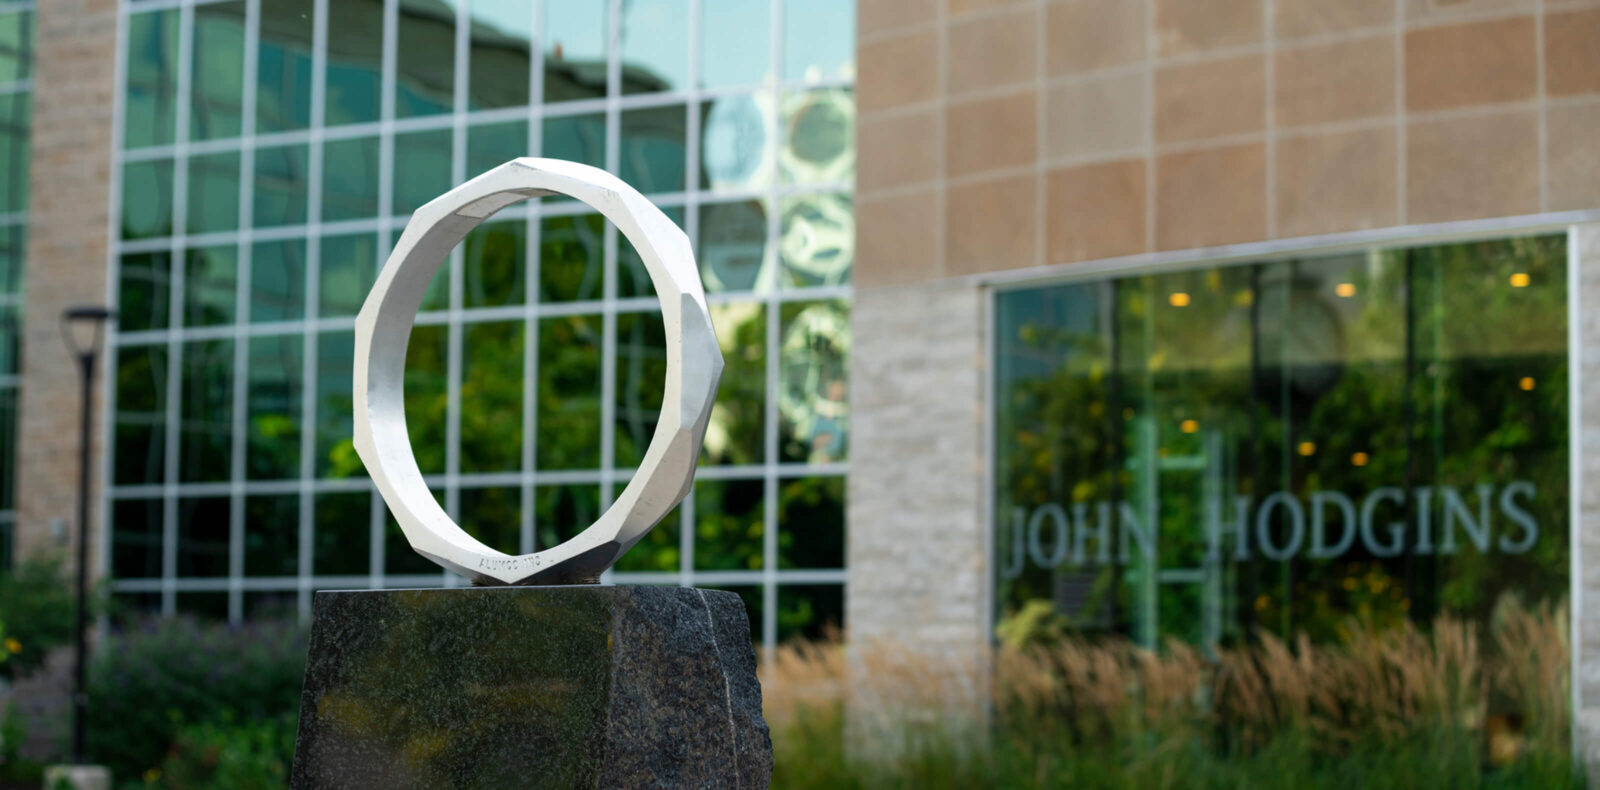 Iron ring in the foreground, with the John Hodgins Engineering Building in the background.